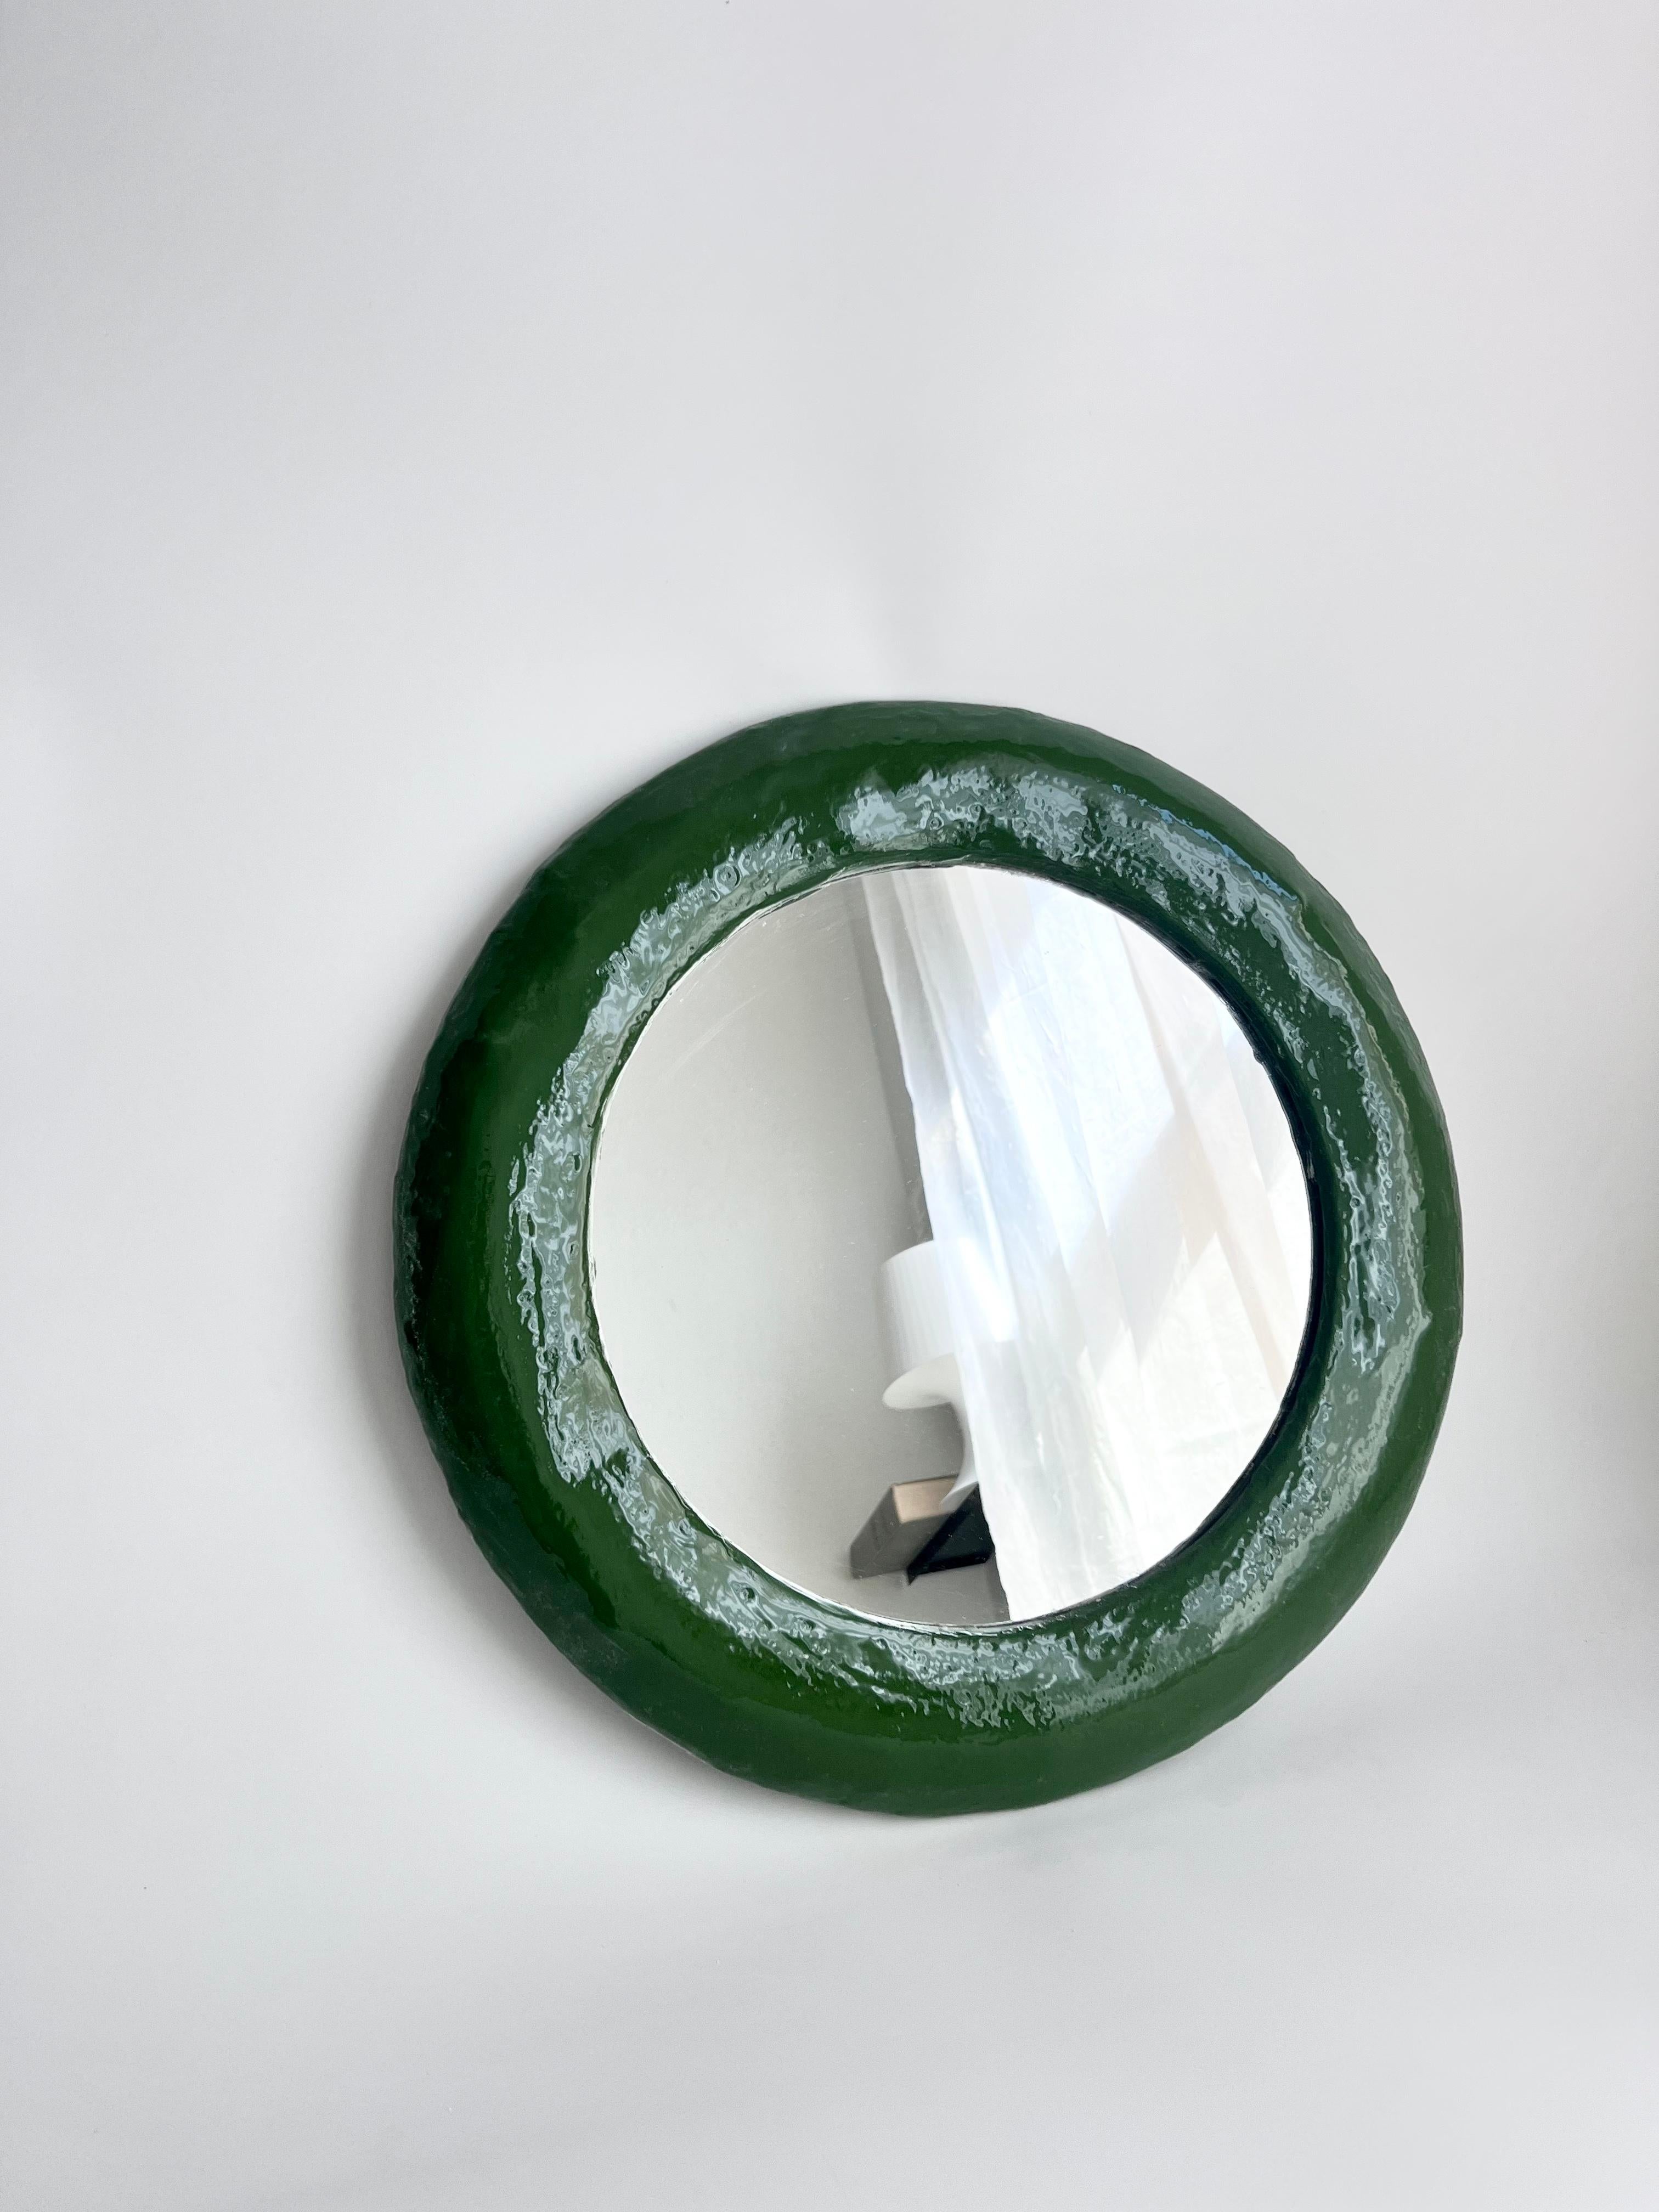 Green Resin Mirror from Studio Chora. This item is hand crafted from a composite plaster-based stone. The stone composite is more durable than previous iterations and has a high gloss resin finish. Recommended for indoor use only.   

Dimensions: 